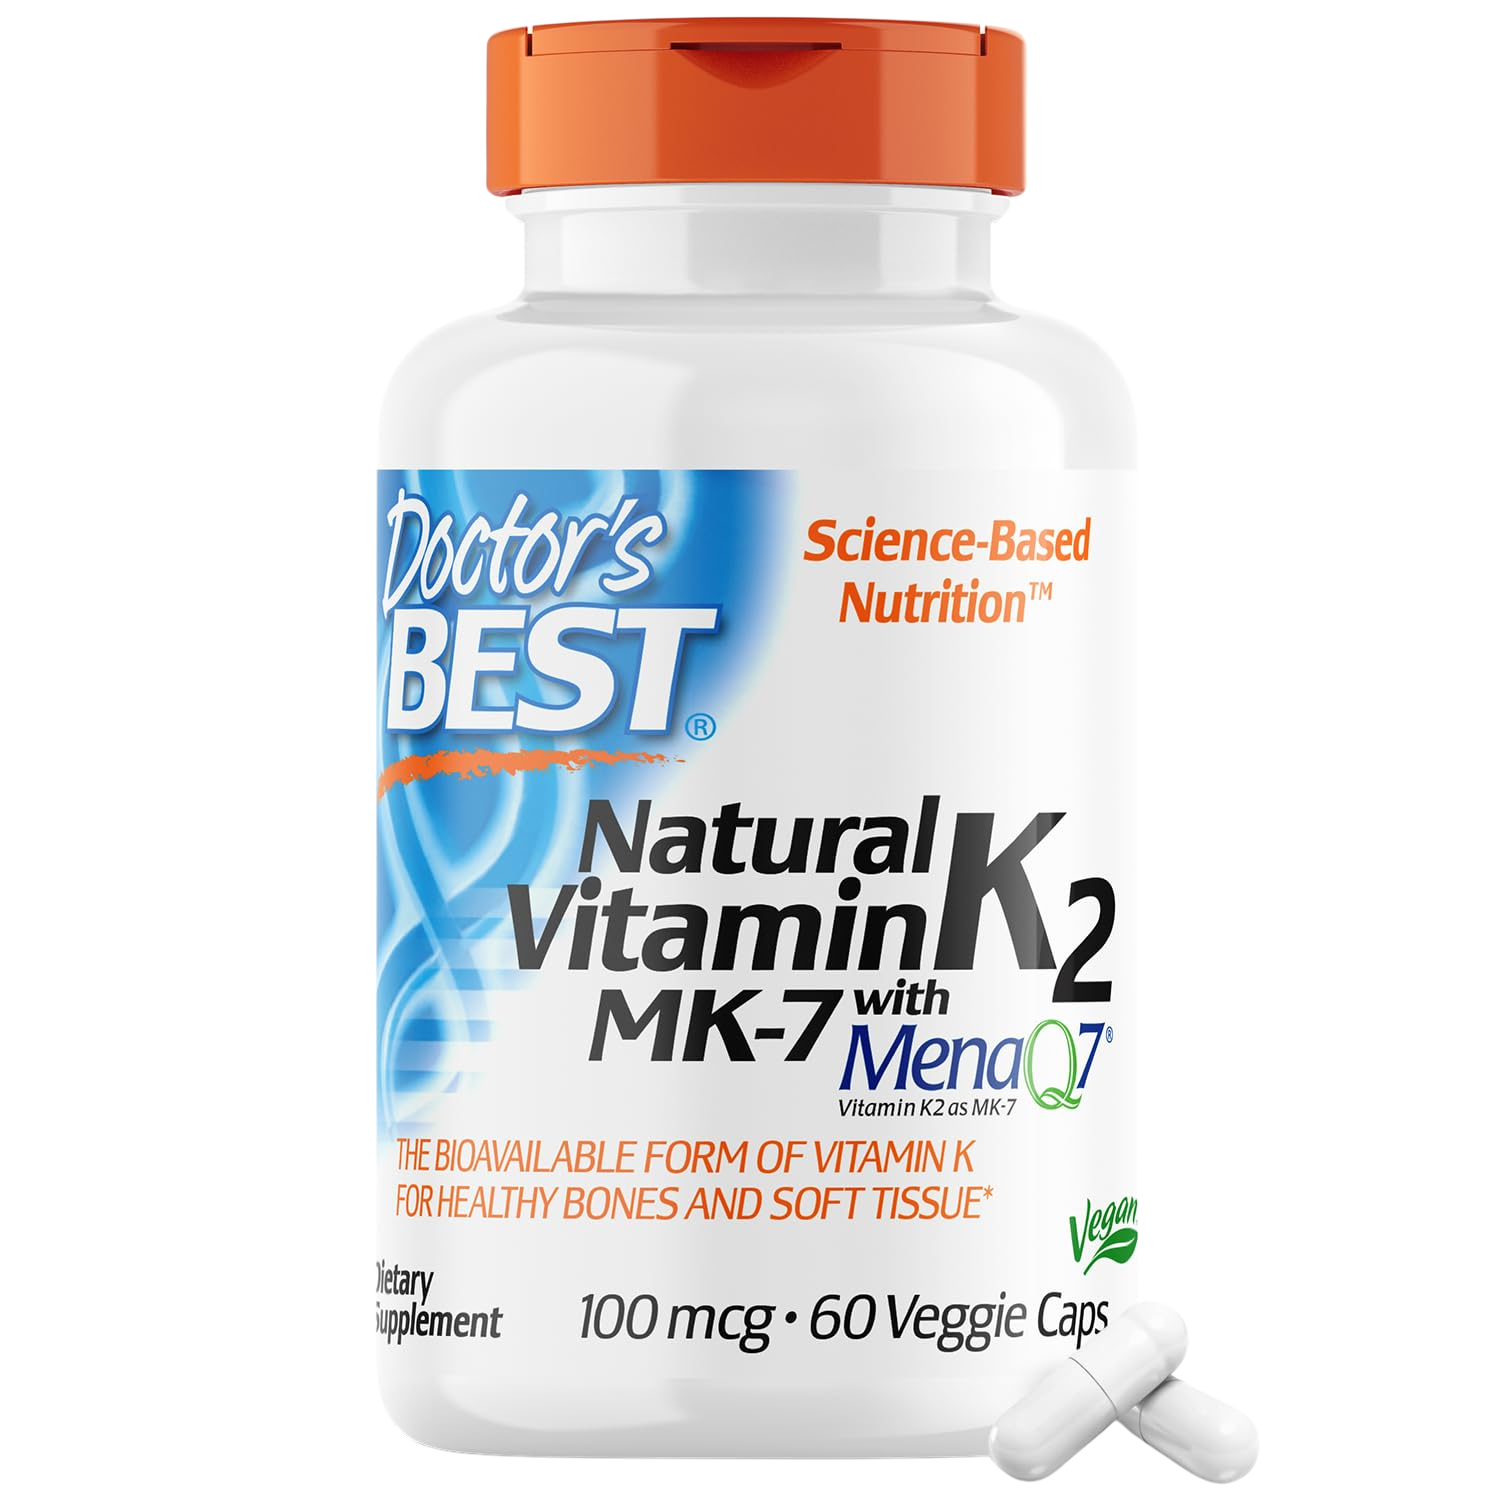 Doctor's Best Natural Vitamin K2 Mk-7 with MenaQ7